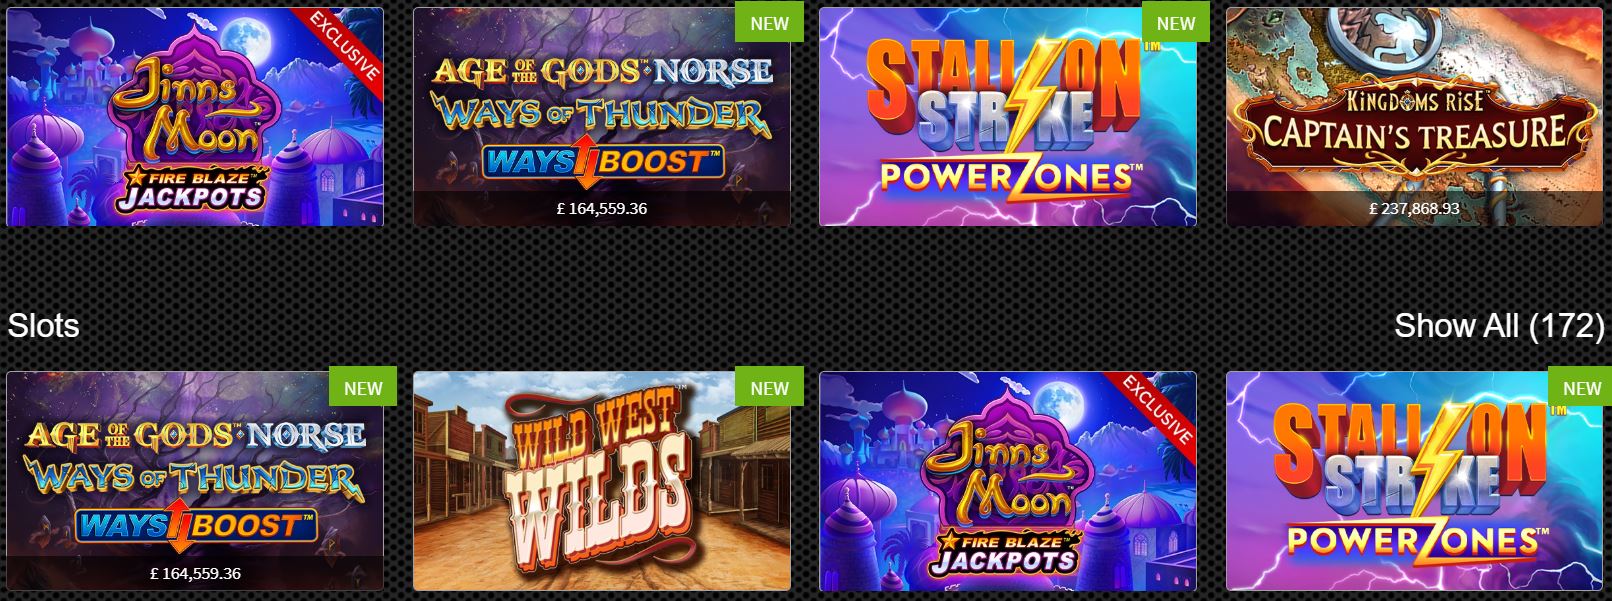 This online casino has games like poker or roulette.